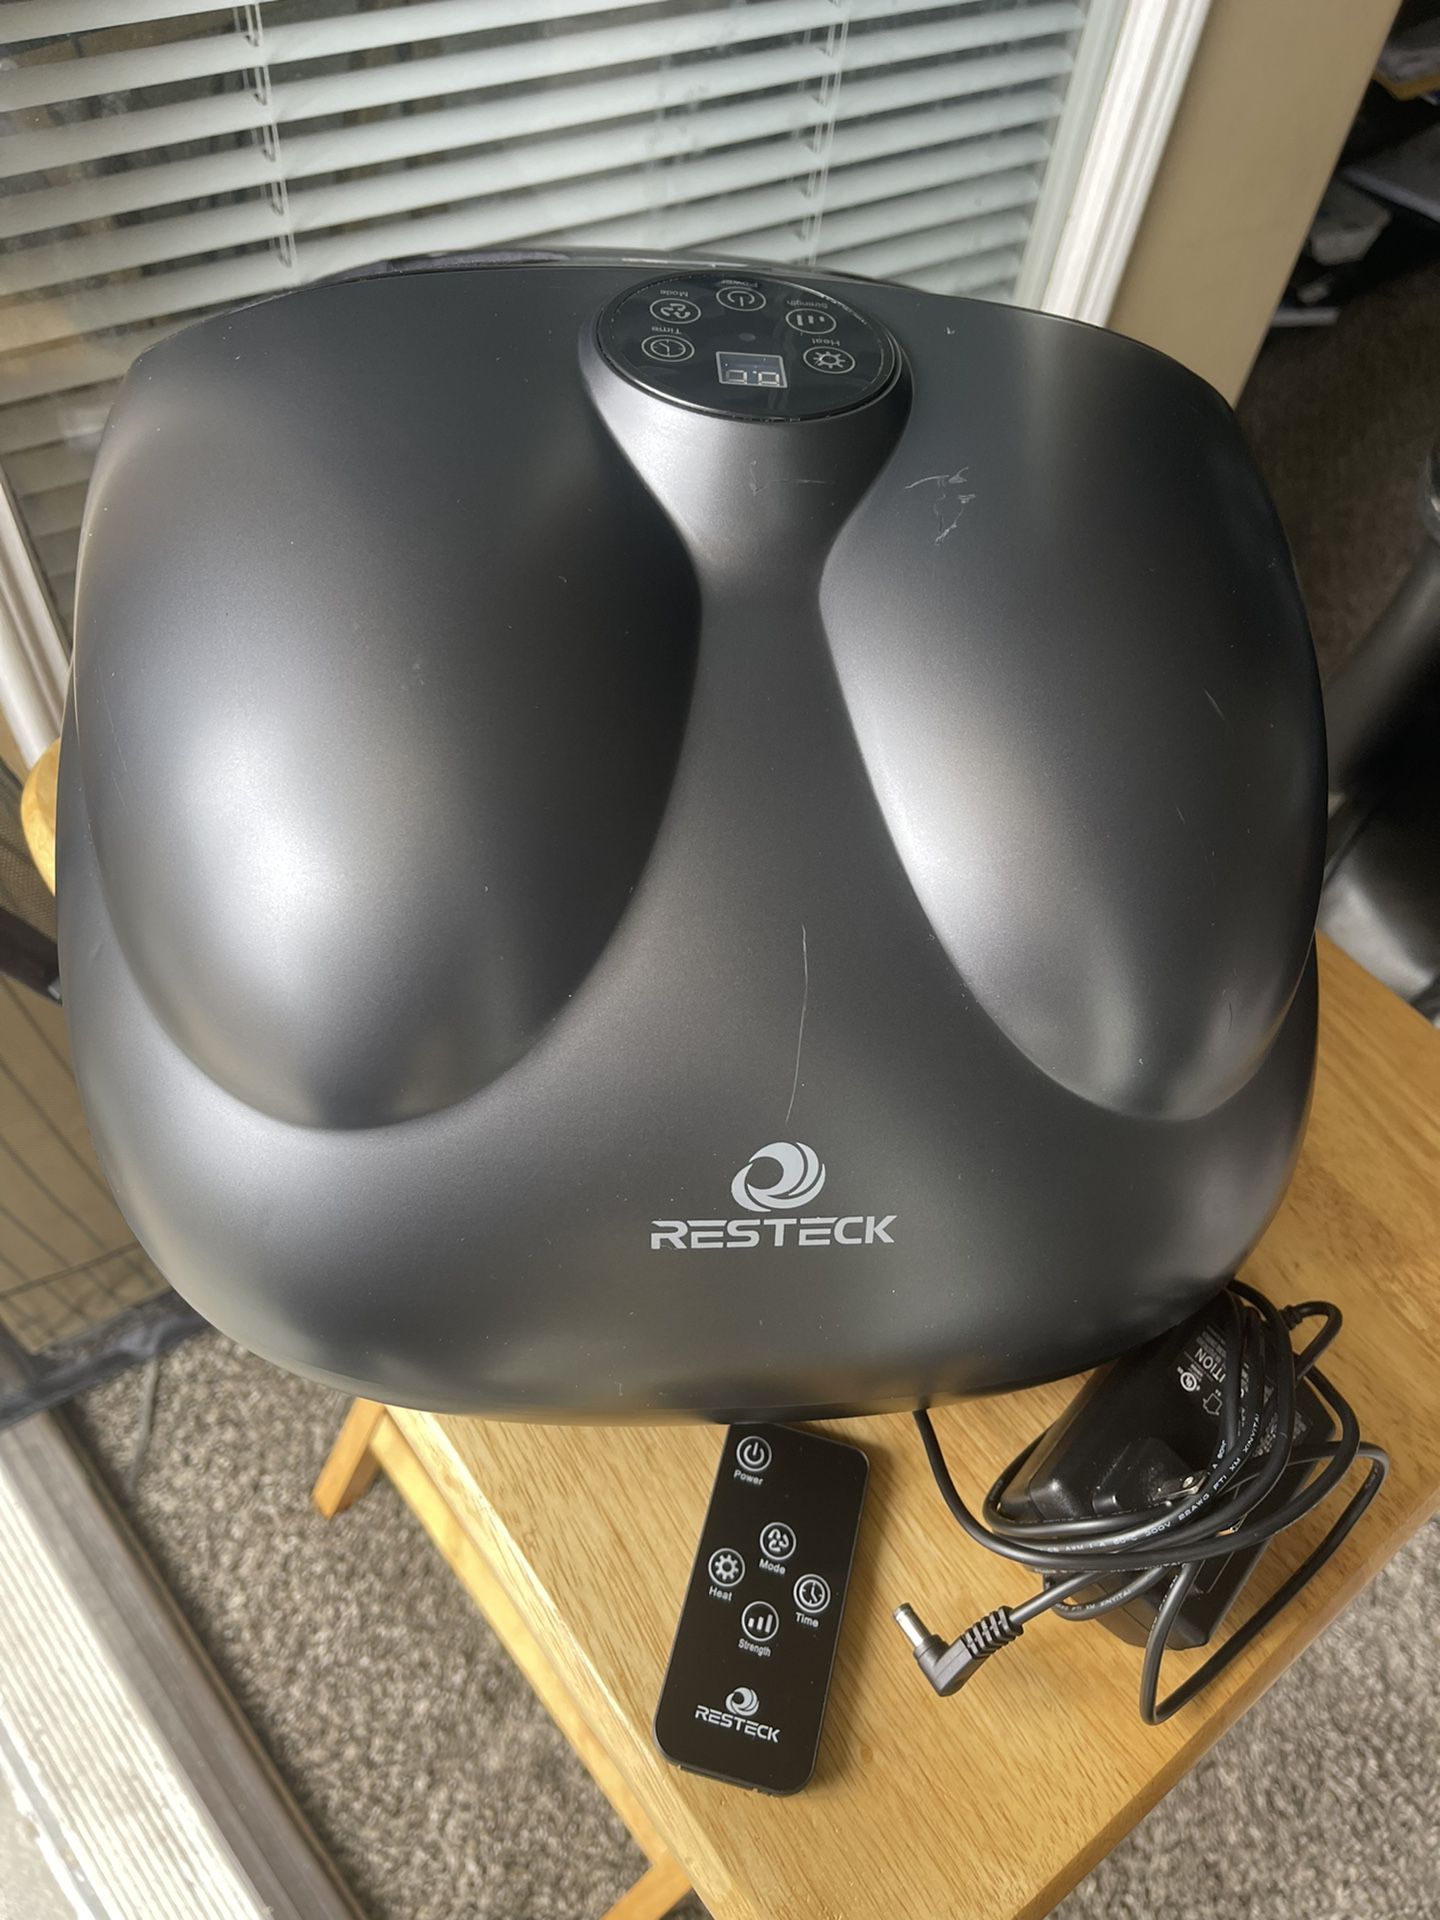 Resteck Shiatsu Foot Massager with Heat for Sale in Houston, TX - OfferUp